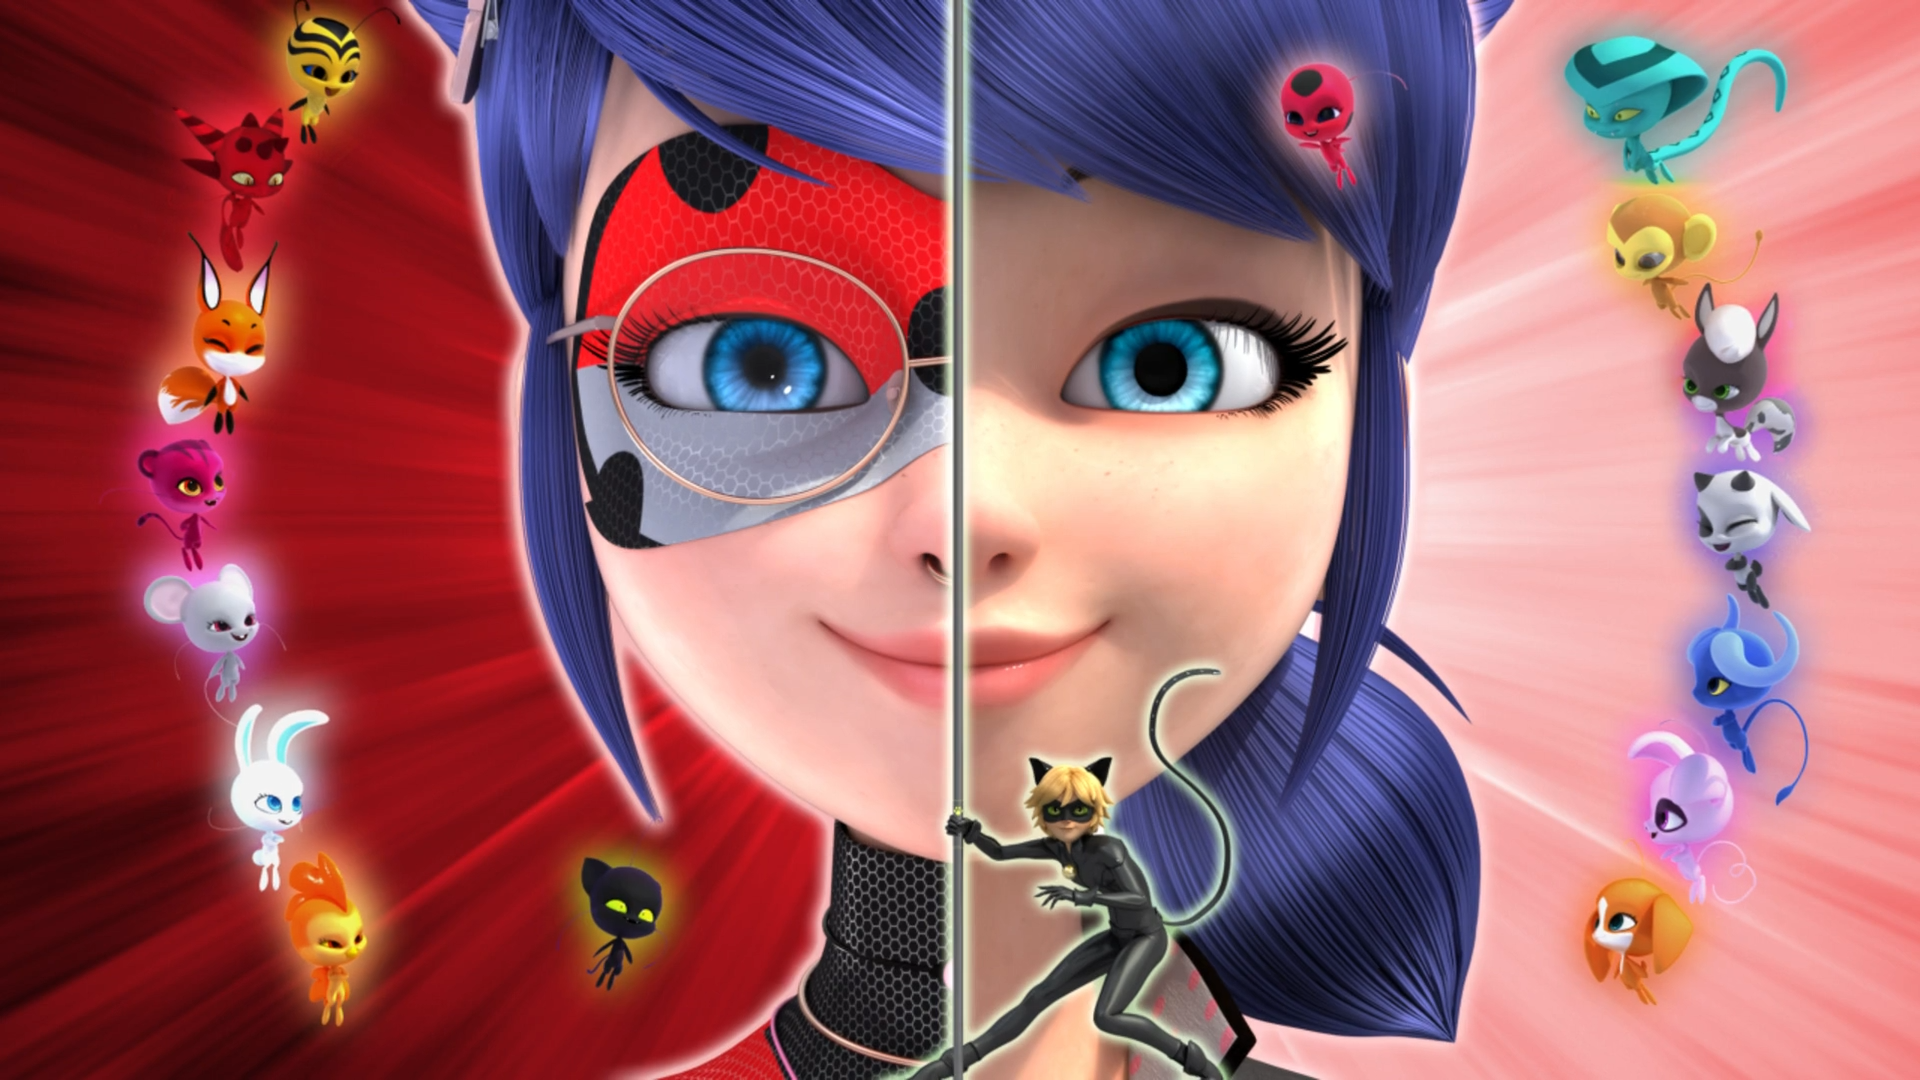 Miraculous characters ranked from the writers' prospective (Only civilian  forms and the 3 main Kwamis) : r/miraculousladybug